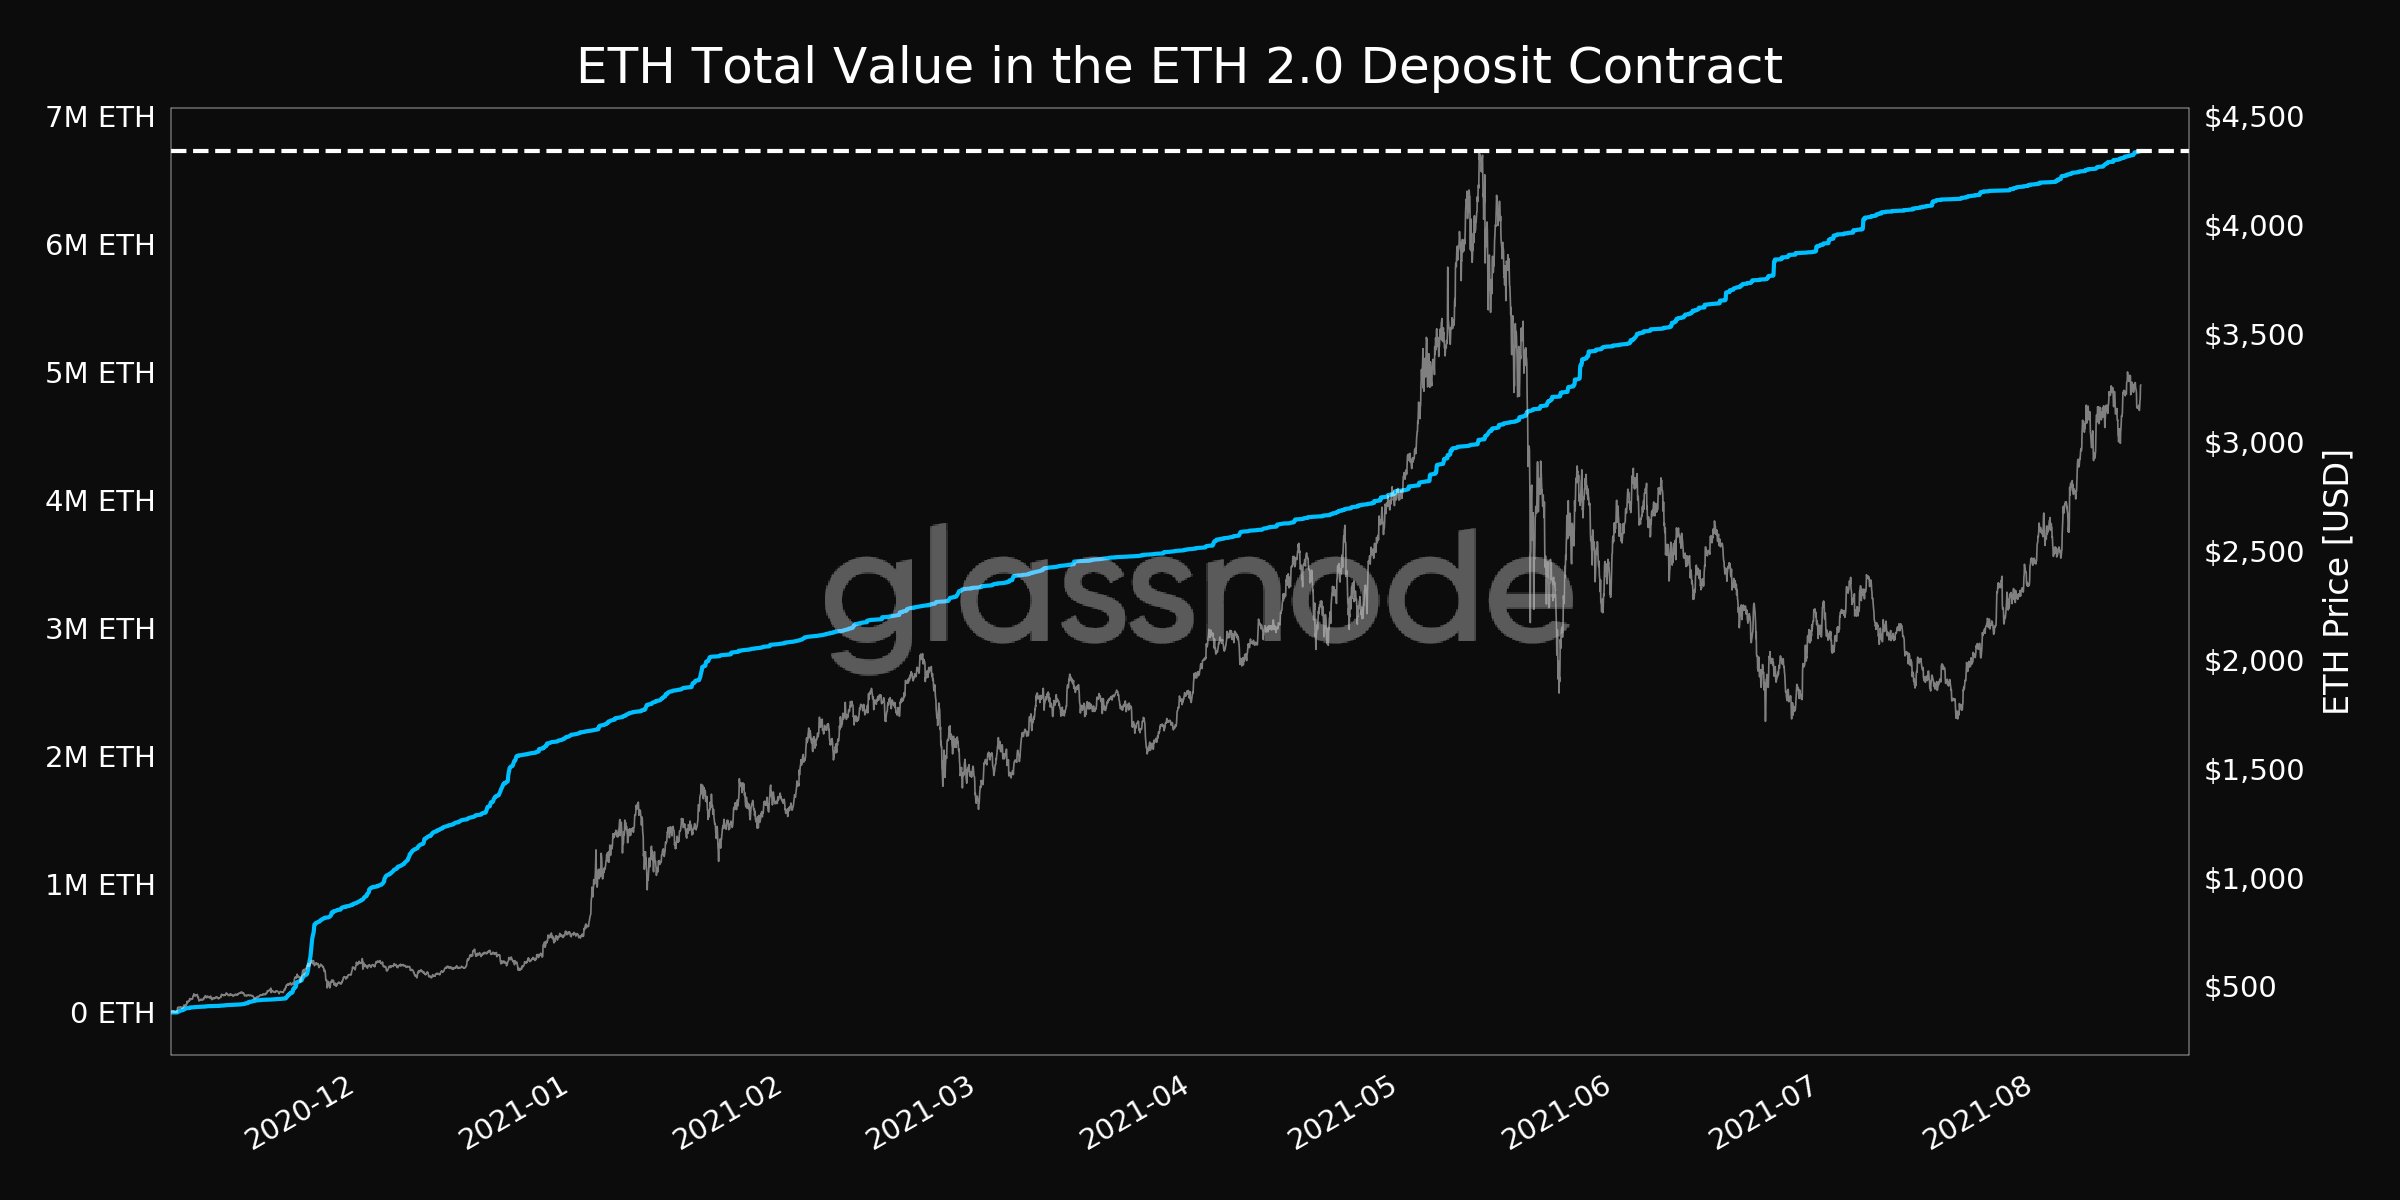 The total value of ETH staked in the ETH2.0 deposit contract